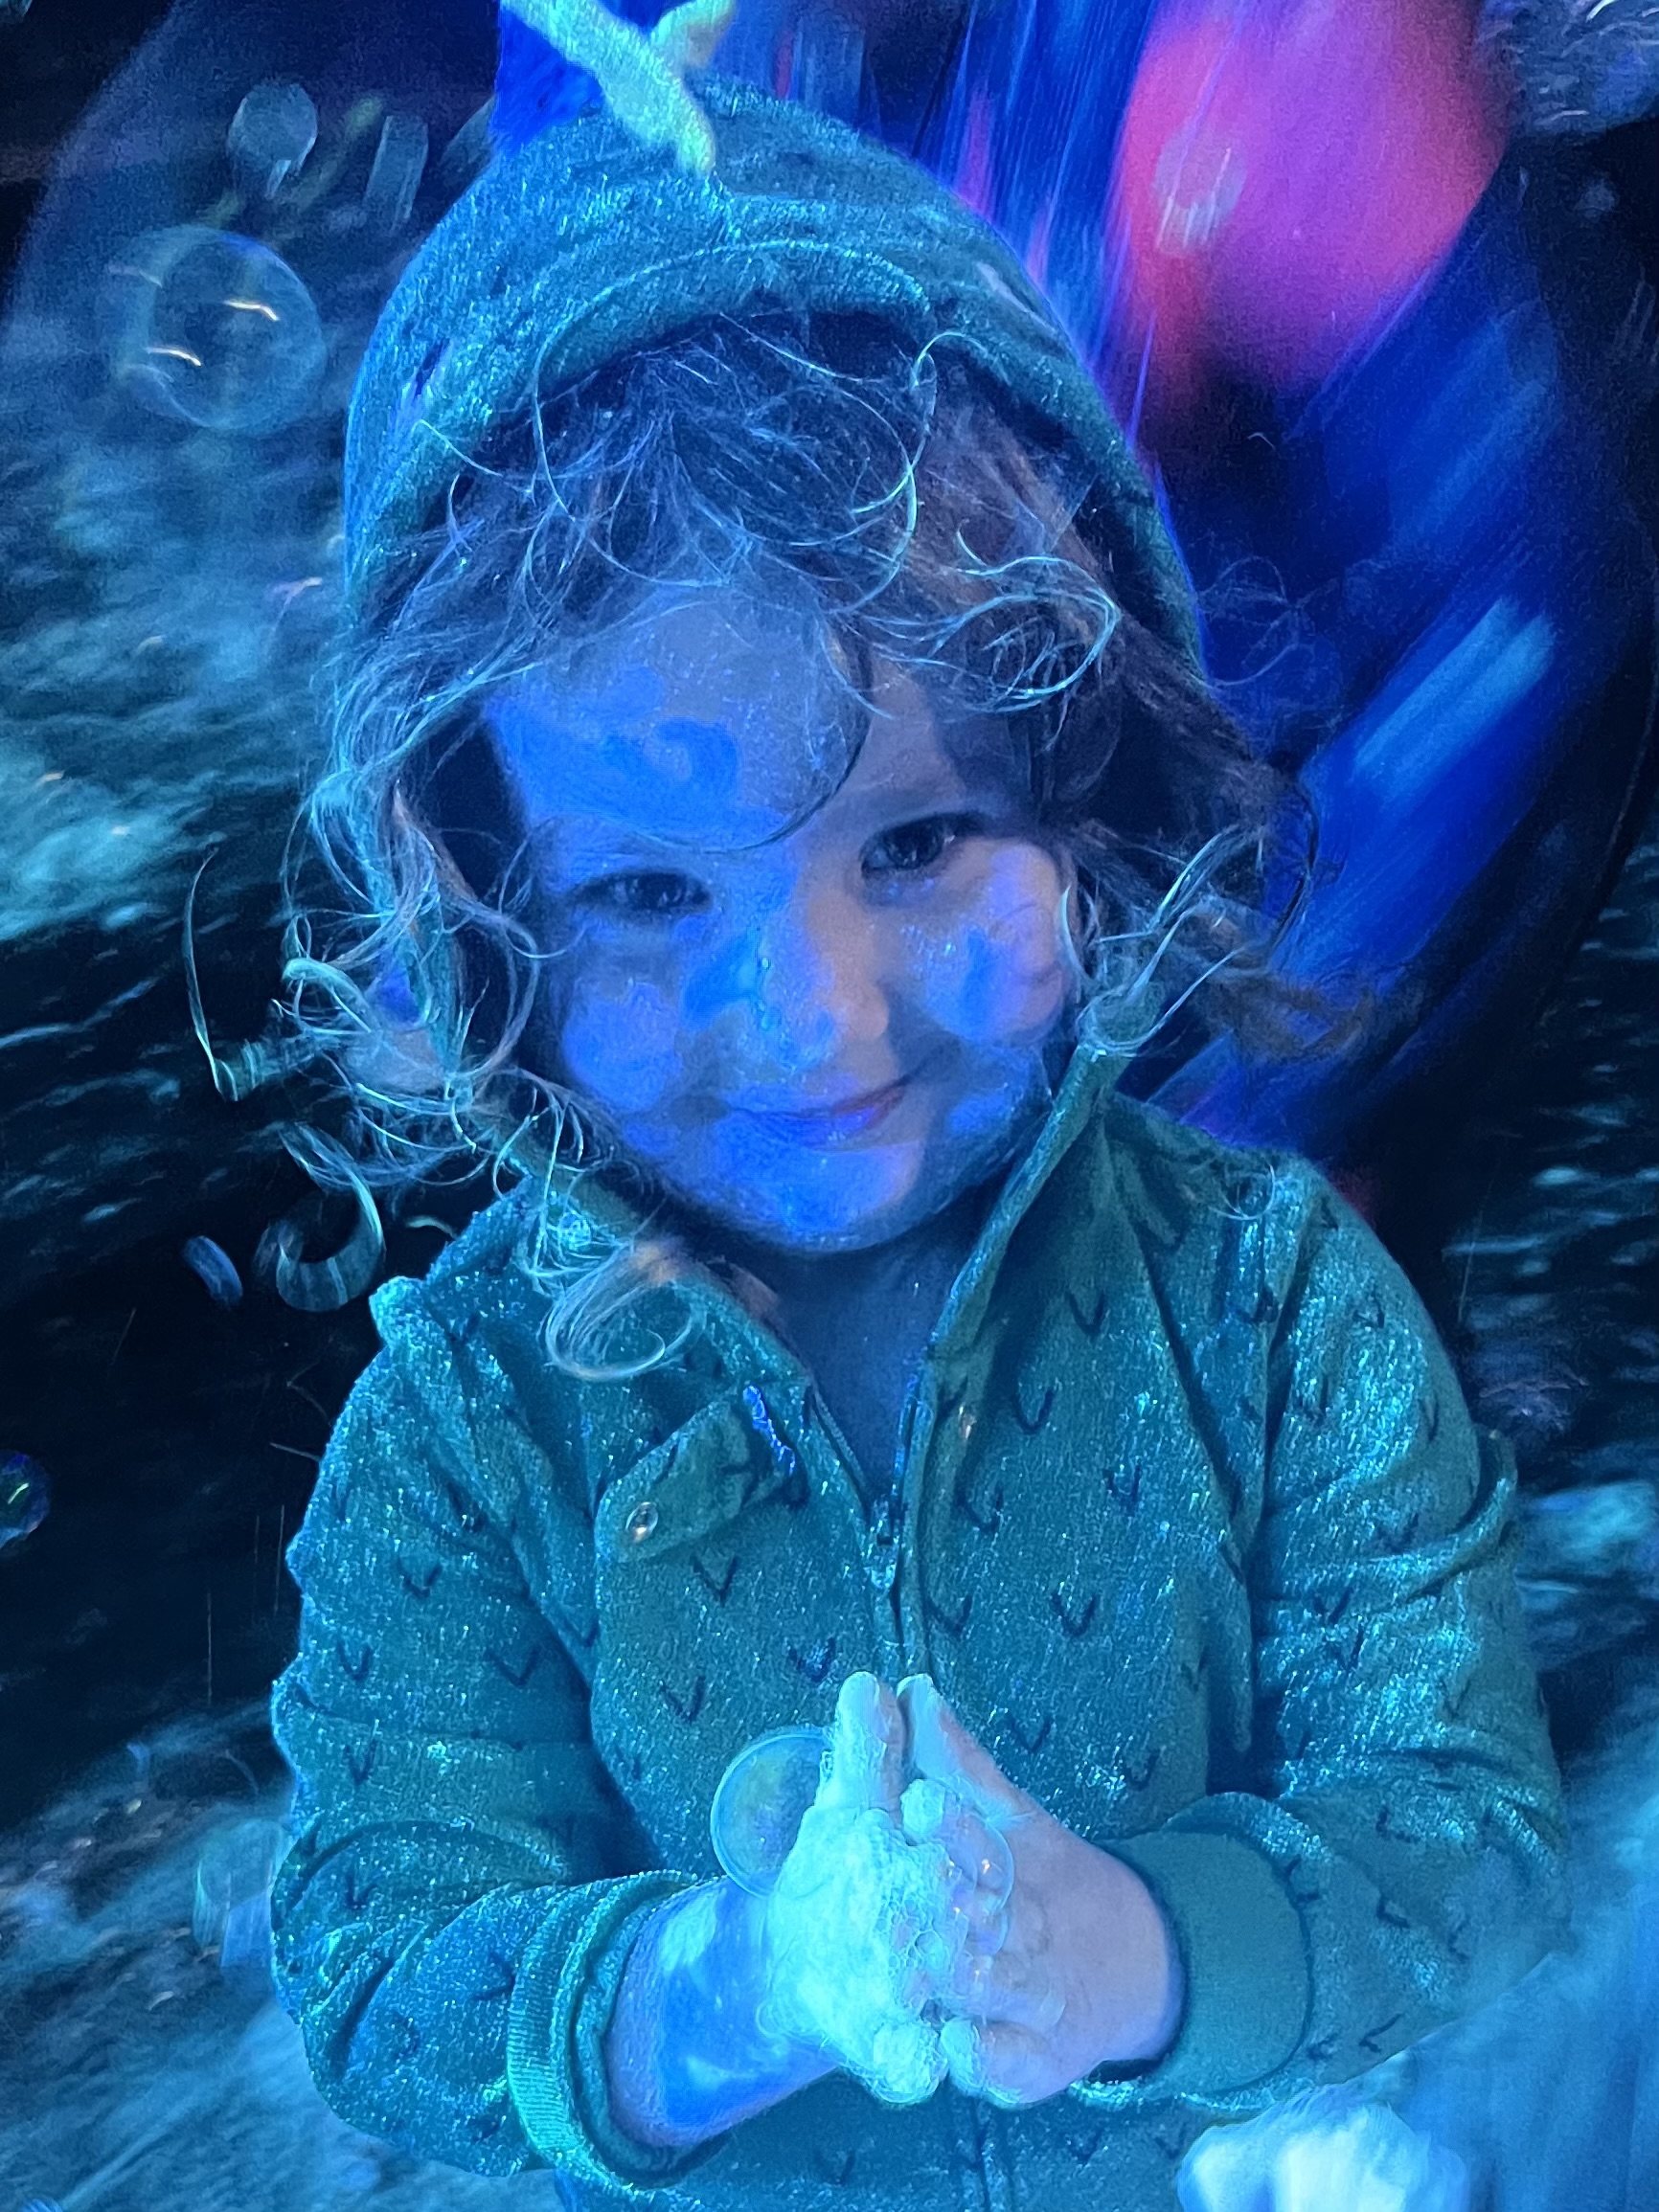 Young child covered in a fluorescent blue dust